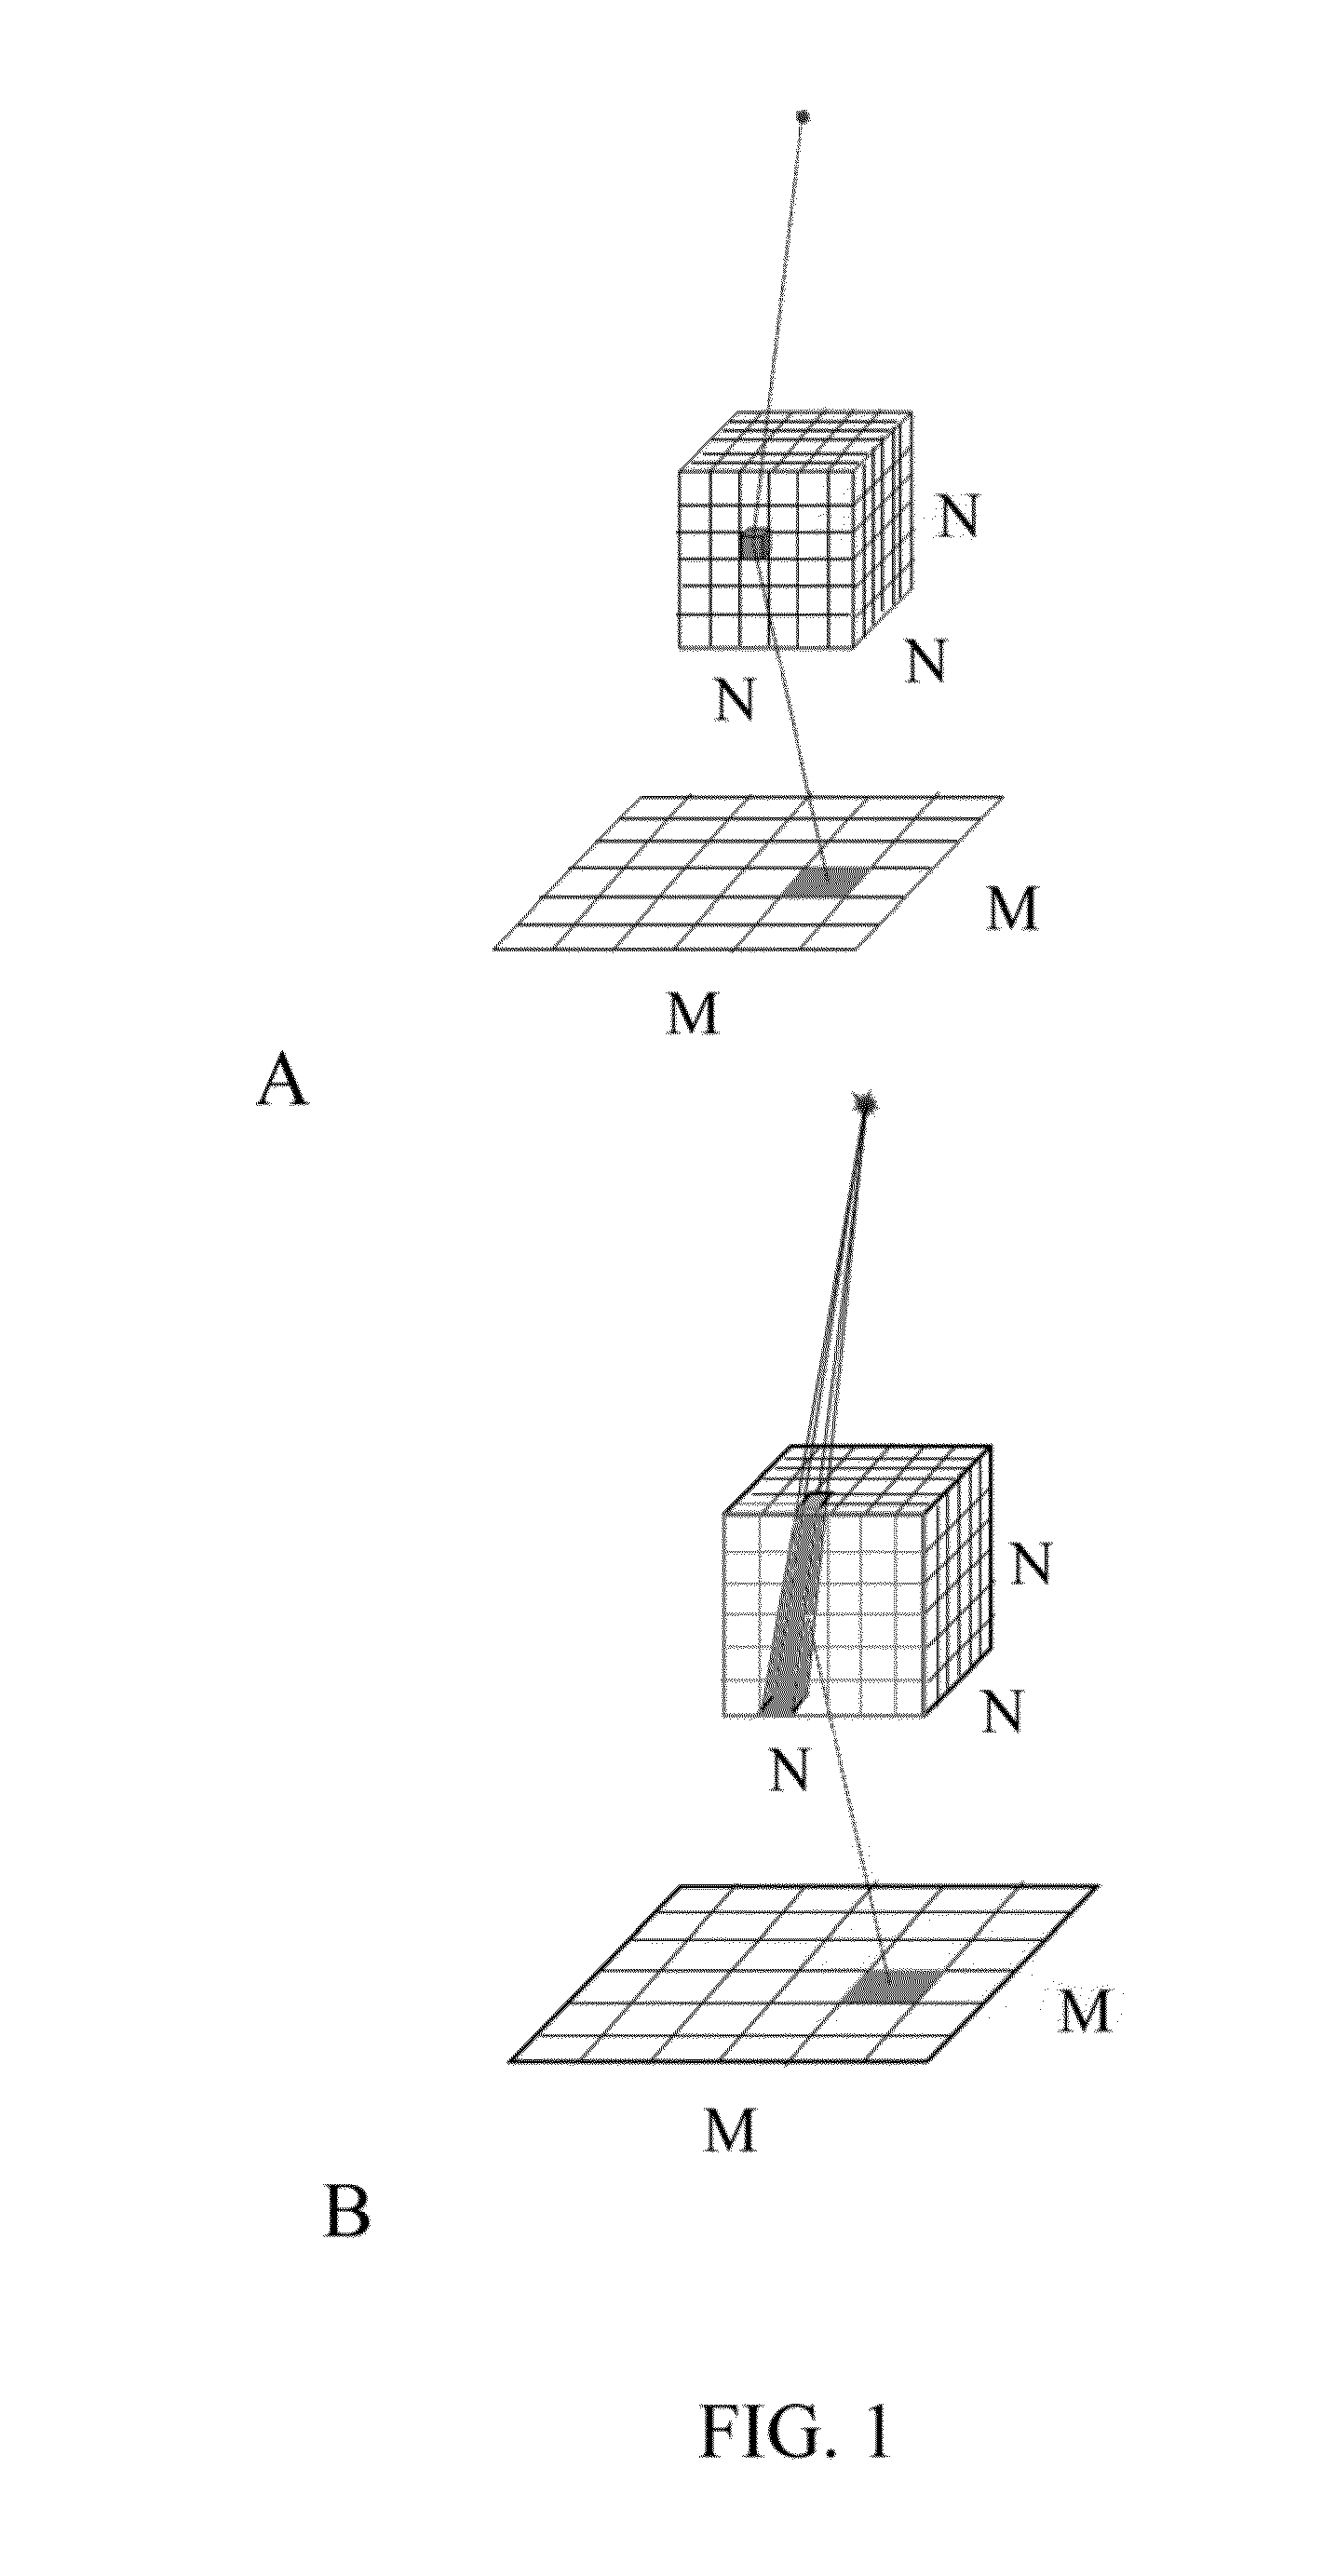 Systems and Methods for Improving Image Quality in Cone Beam Computed Tomography